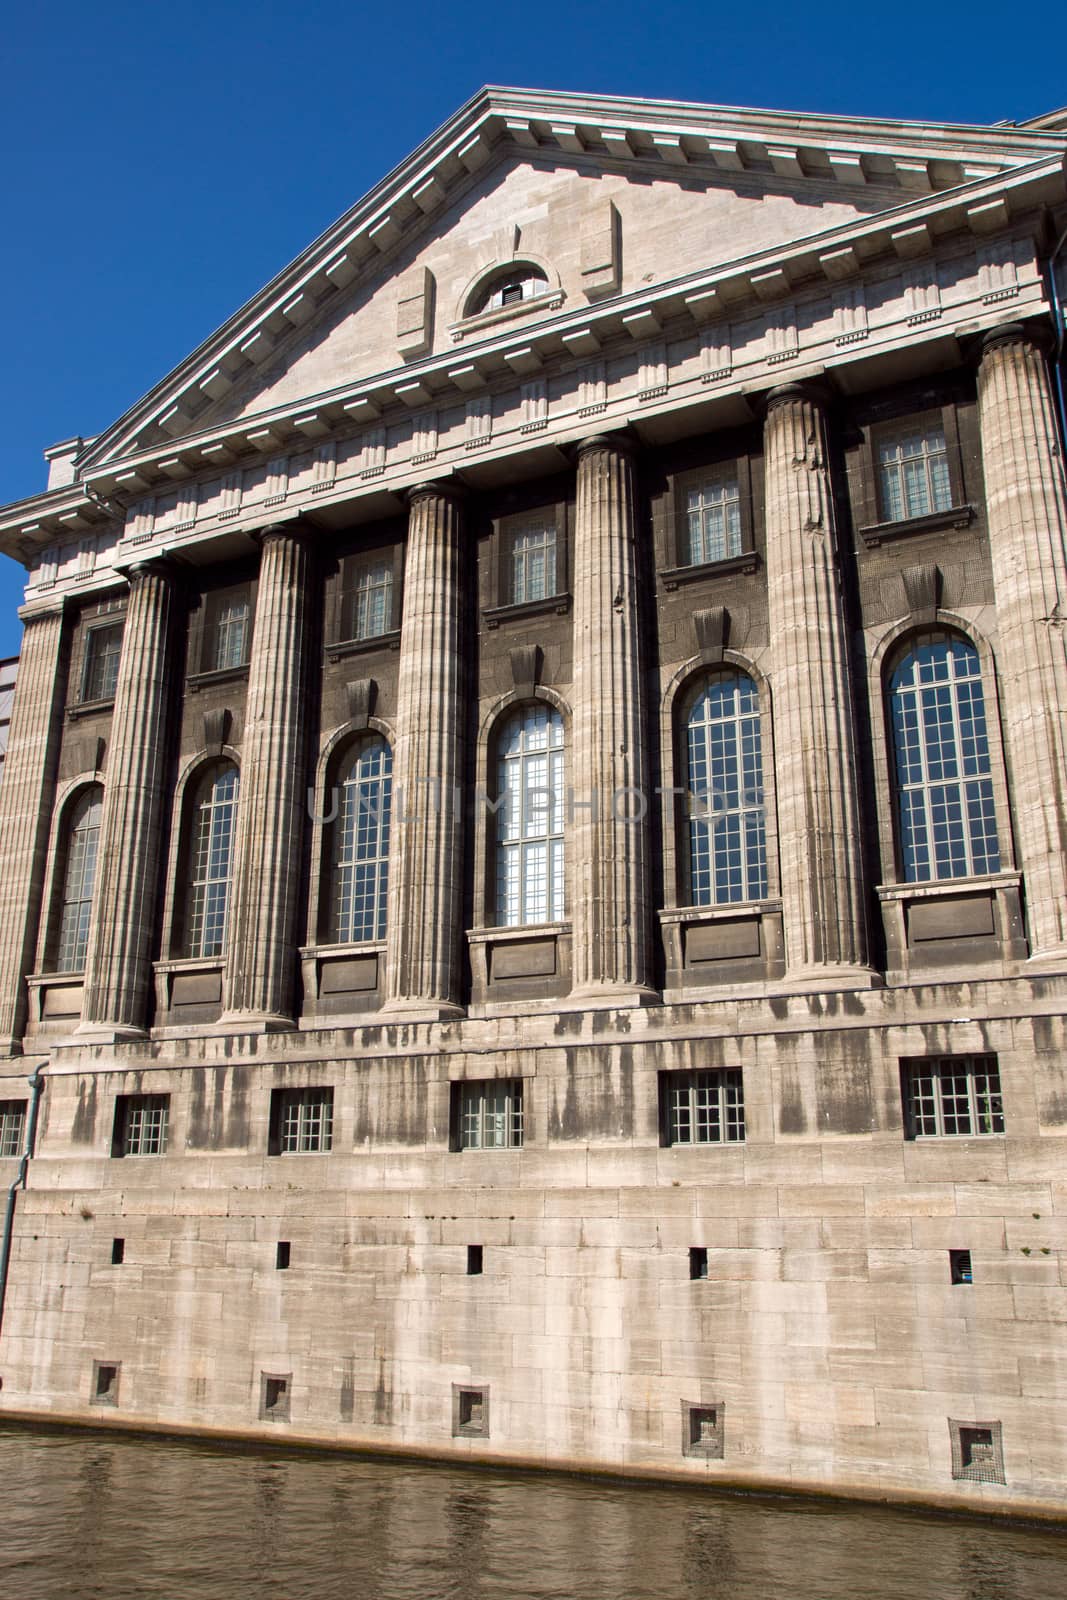 The Pergamonmuseum on the island of museums in Berlin